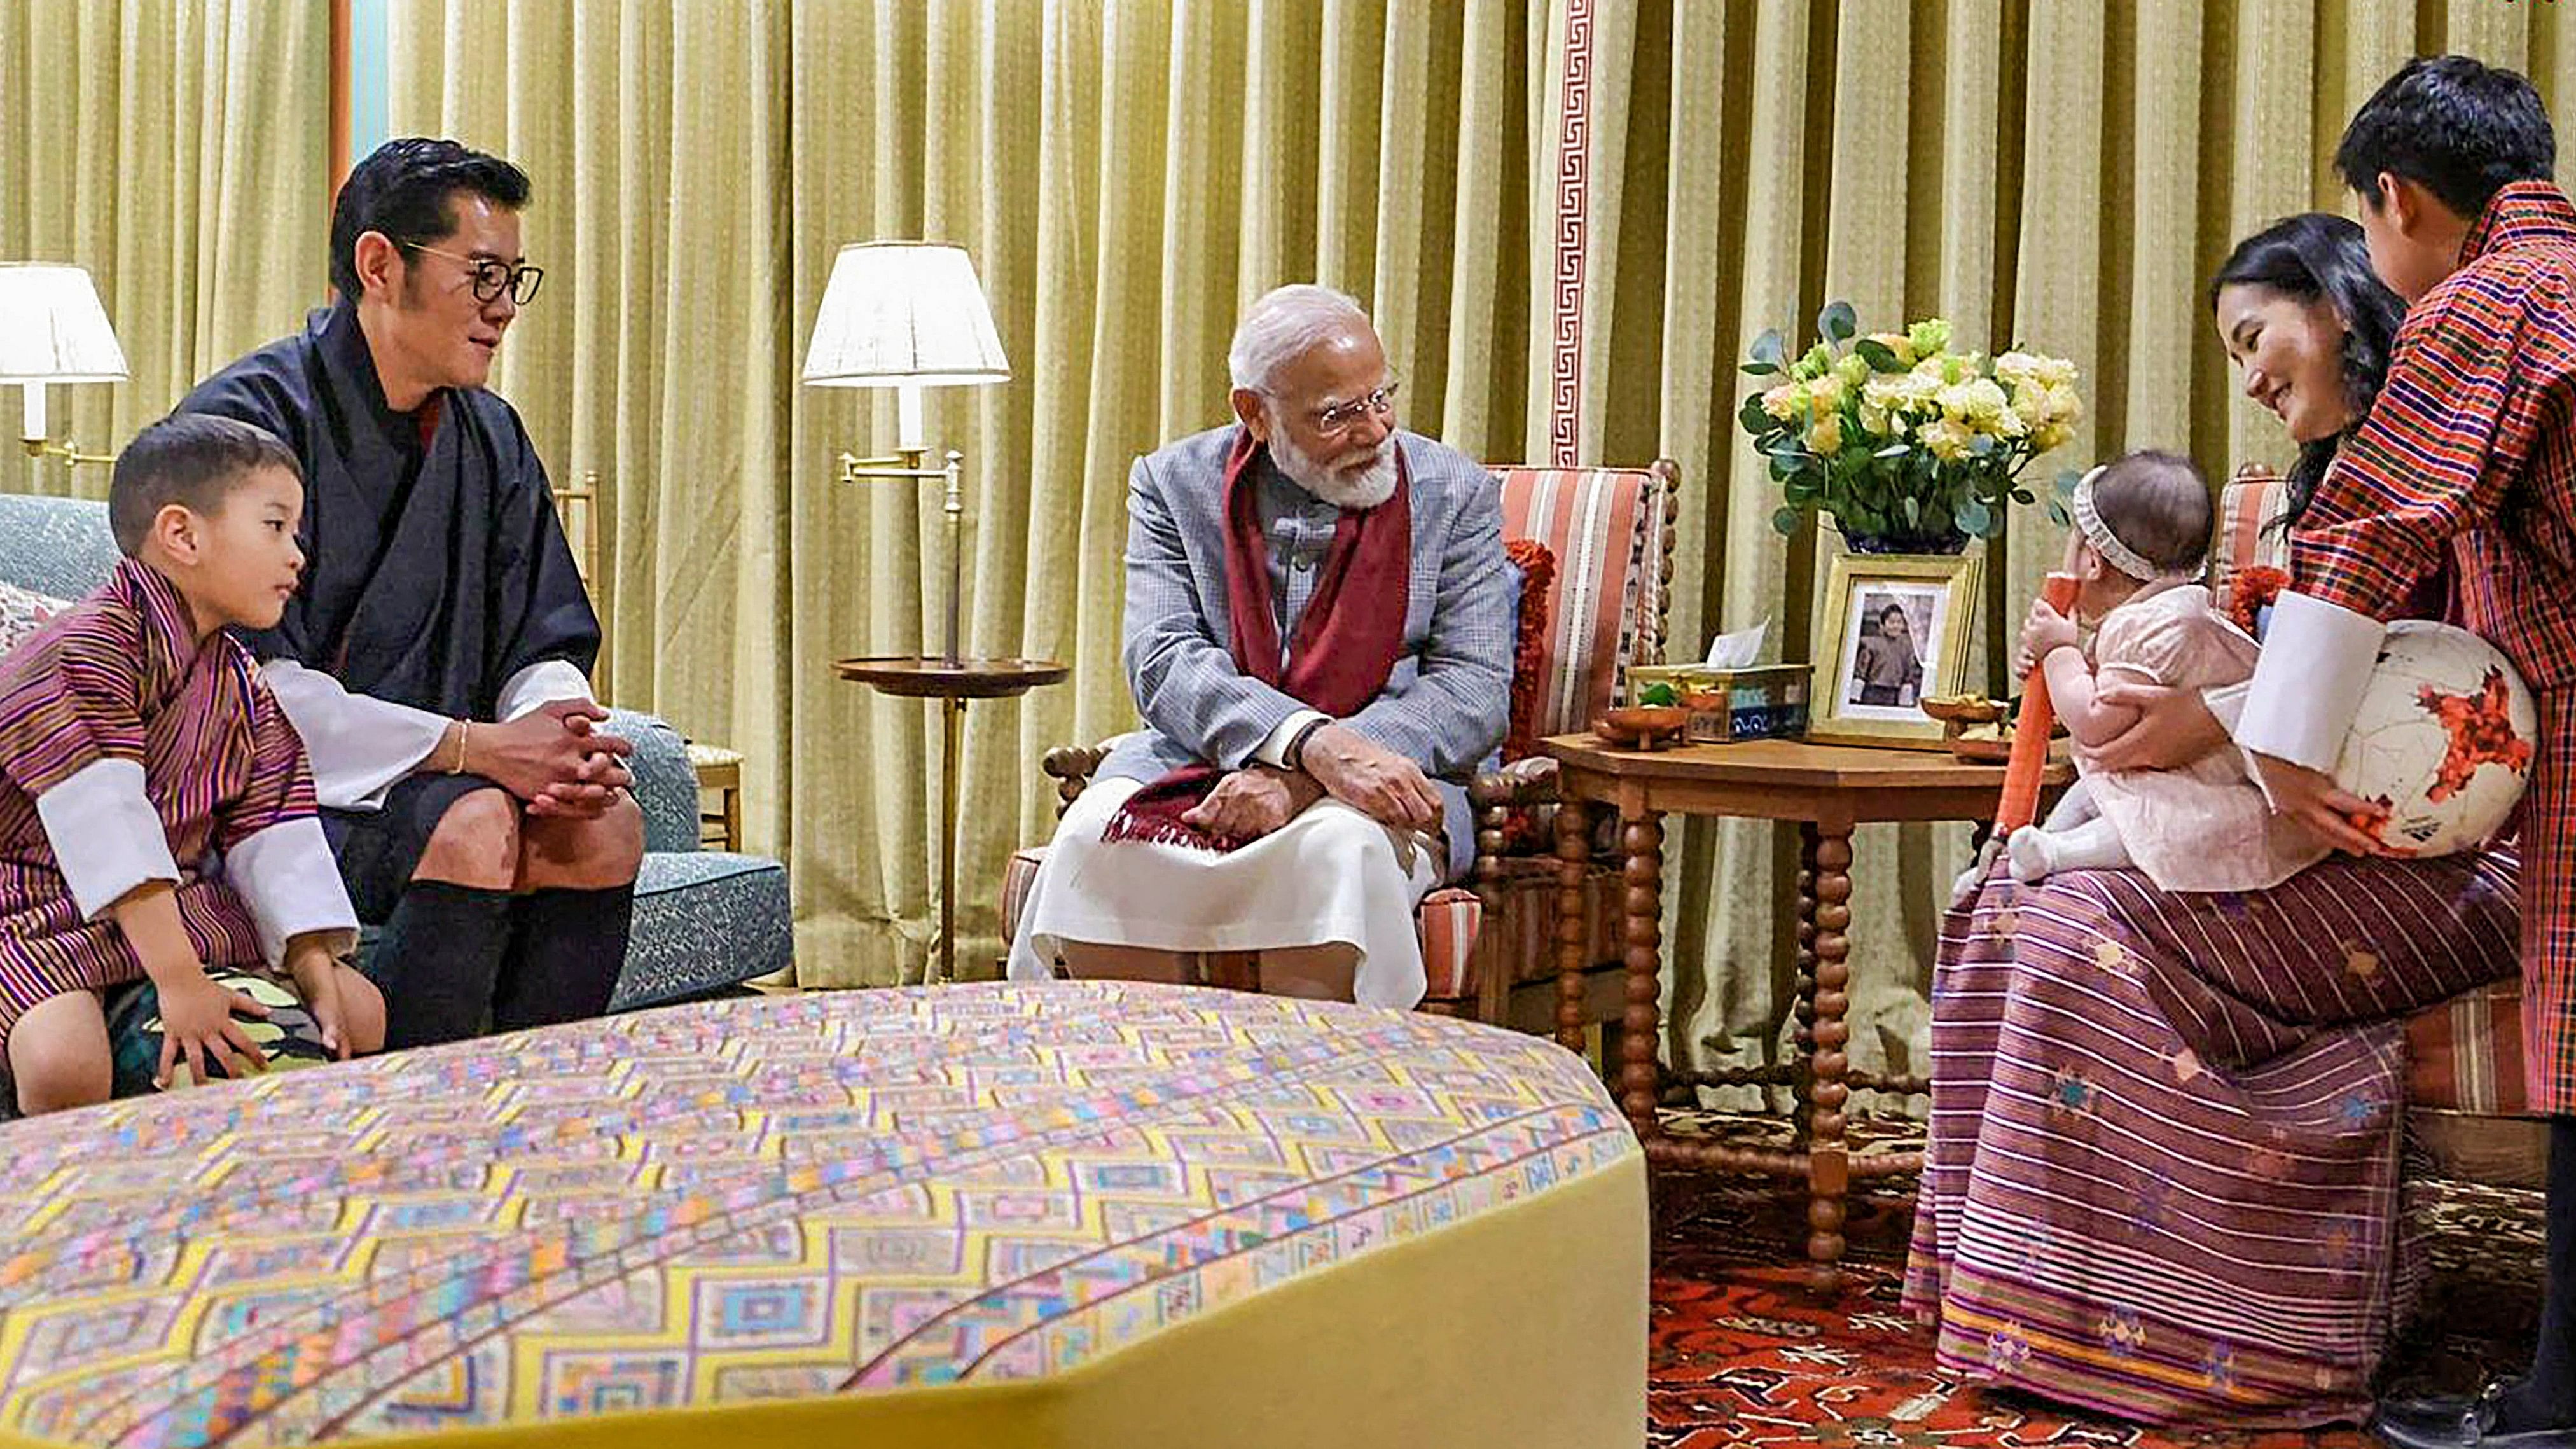 <div class="paragraphs"><p>Prime Minister Narendra Modi attends a private dinner hosted by King of Bhutan Jigme Khesar Namgyel Wangchuck (L) and his family at the Lingkana Palace, in Thimphu. </p></div>